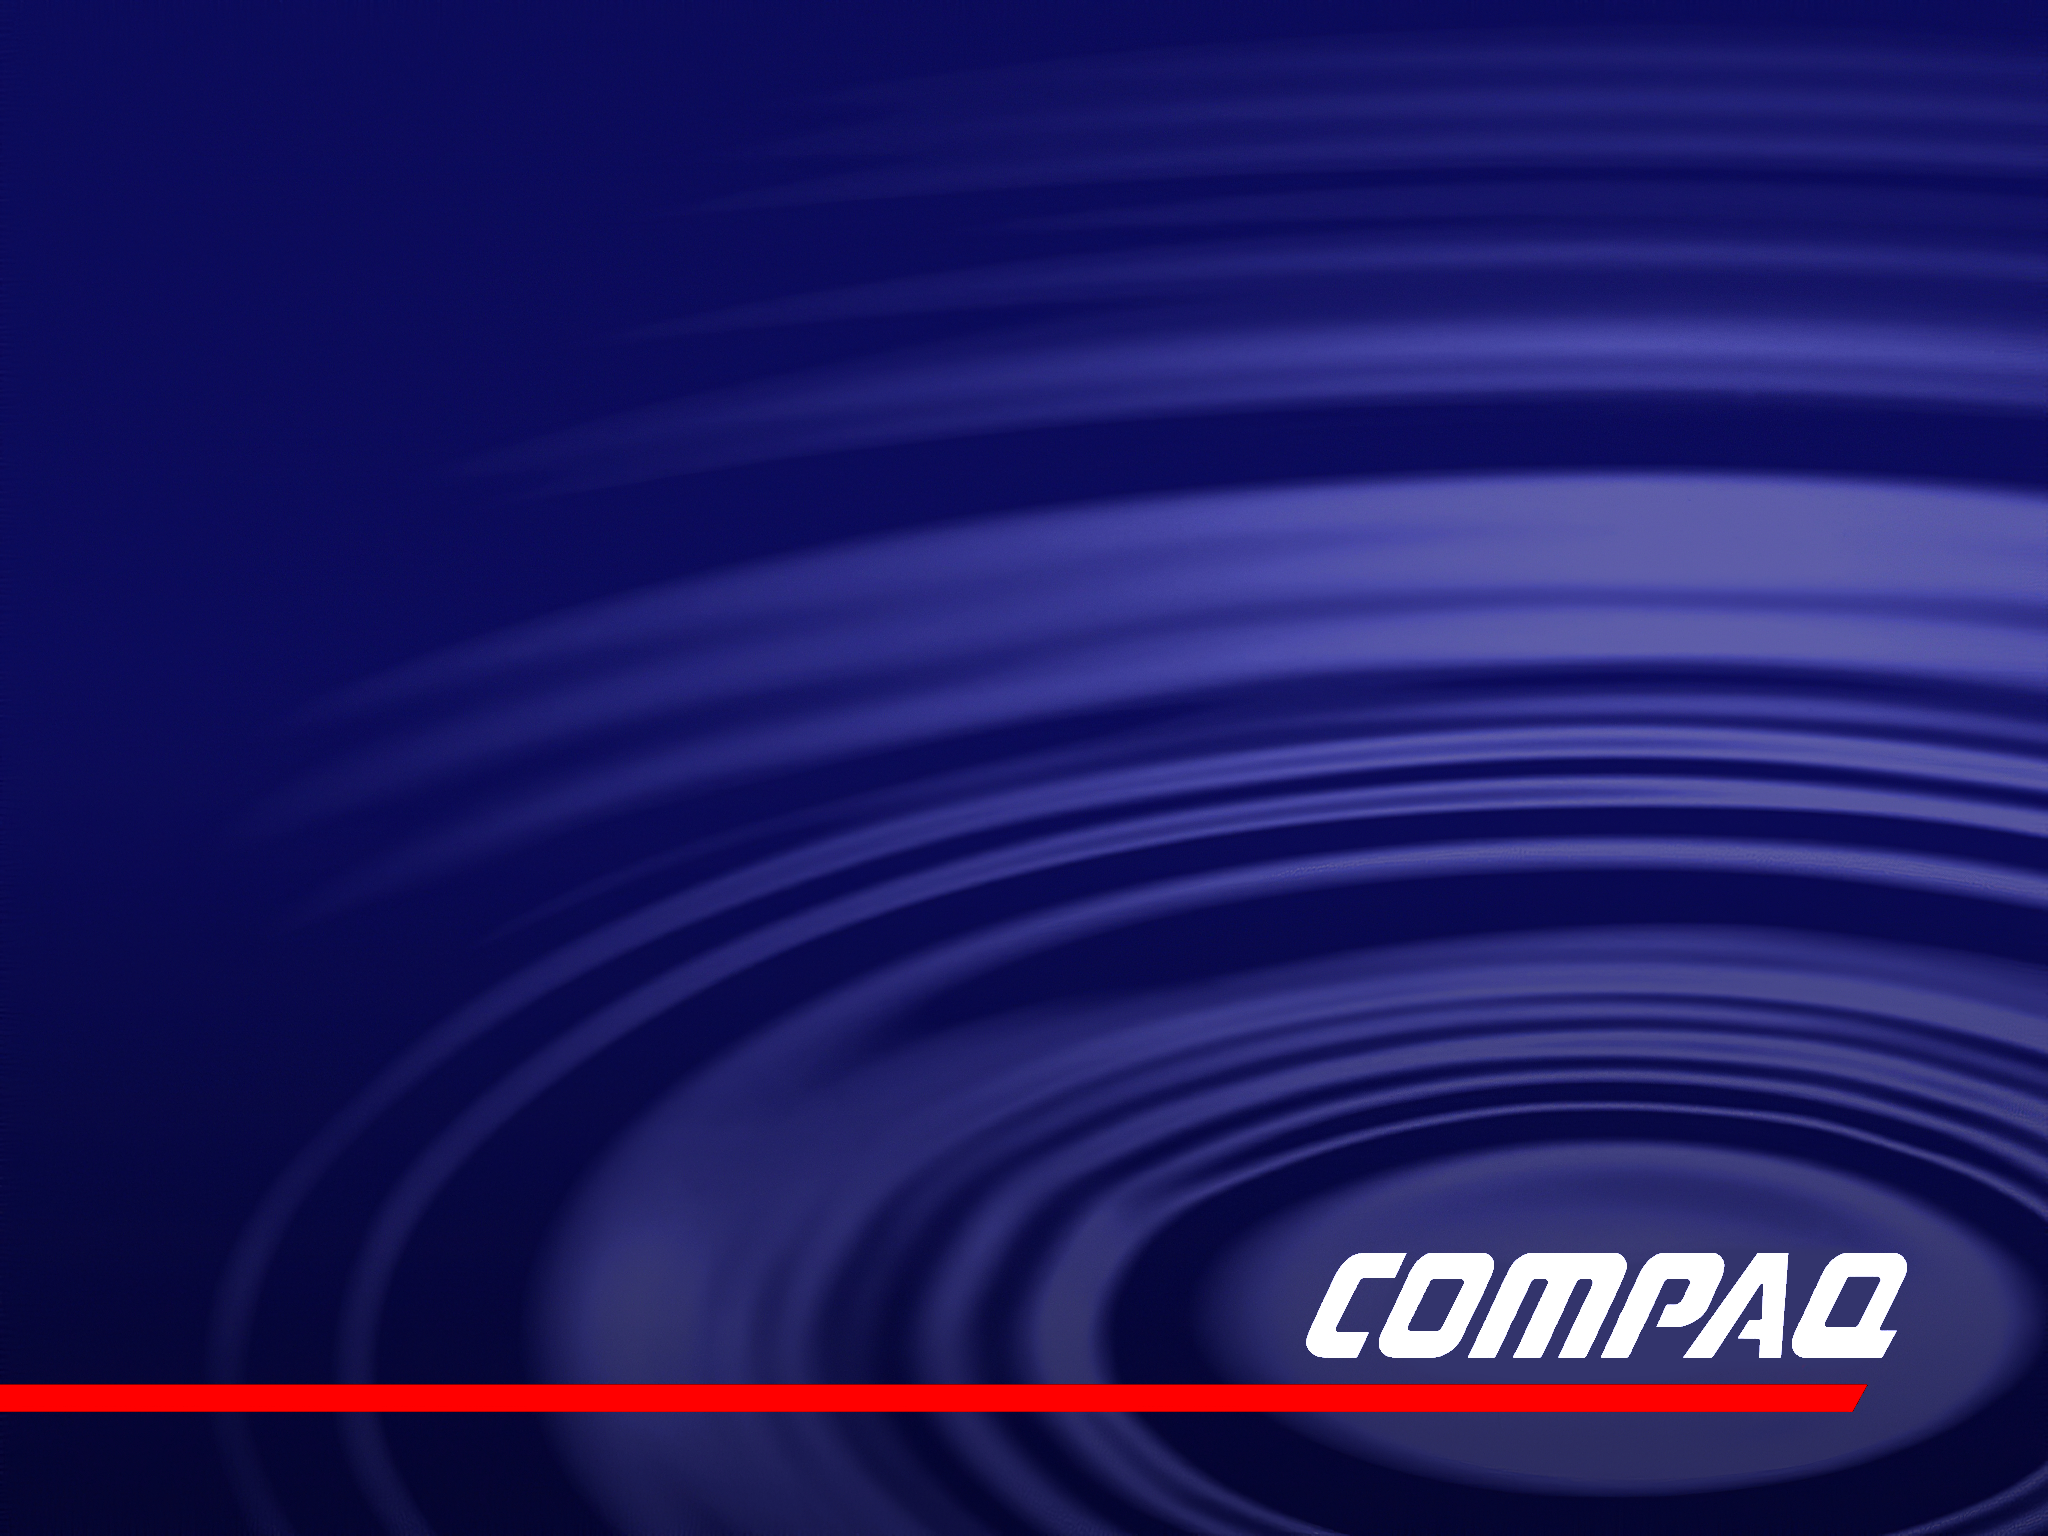 Custom Compaq Wallpaper #1 - (With 1982-1993 Logo) by ForateiSIX on  DeviantArt